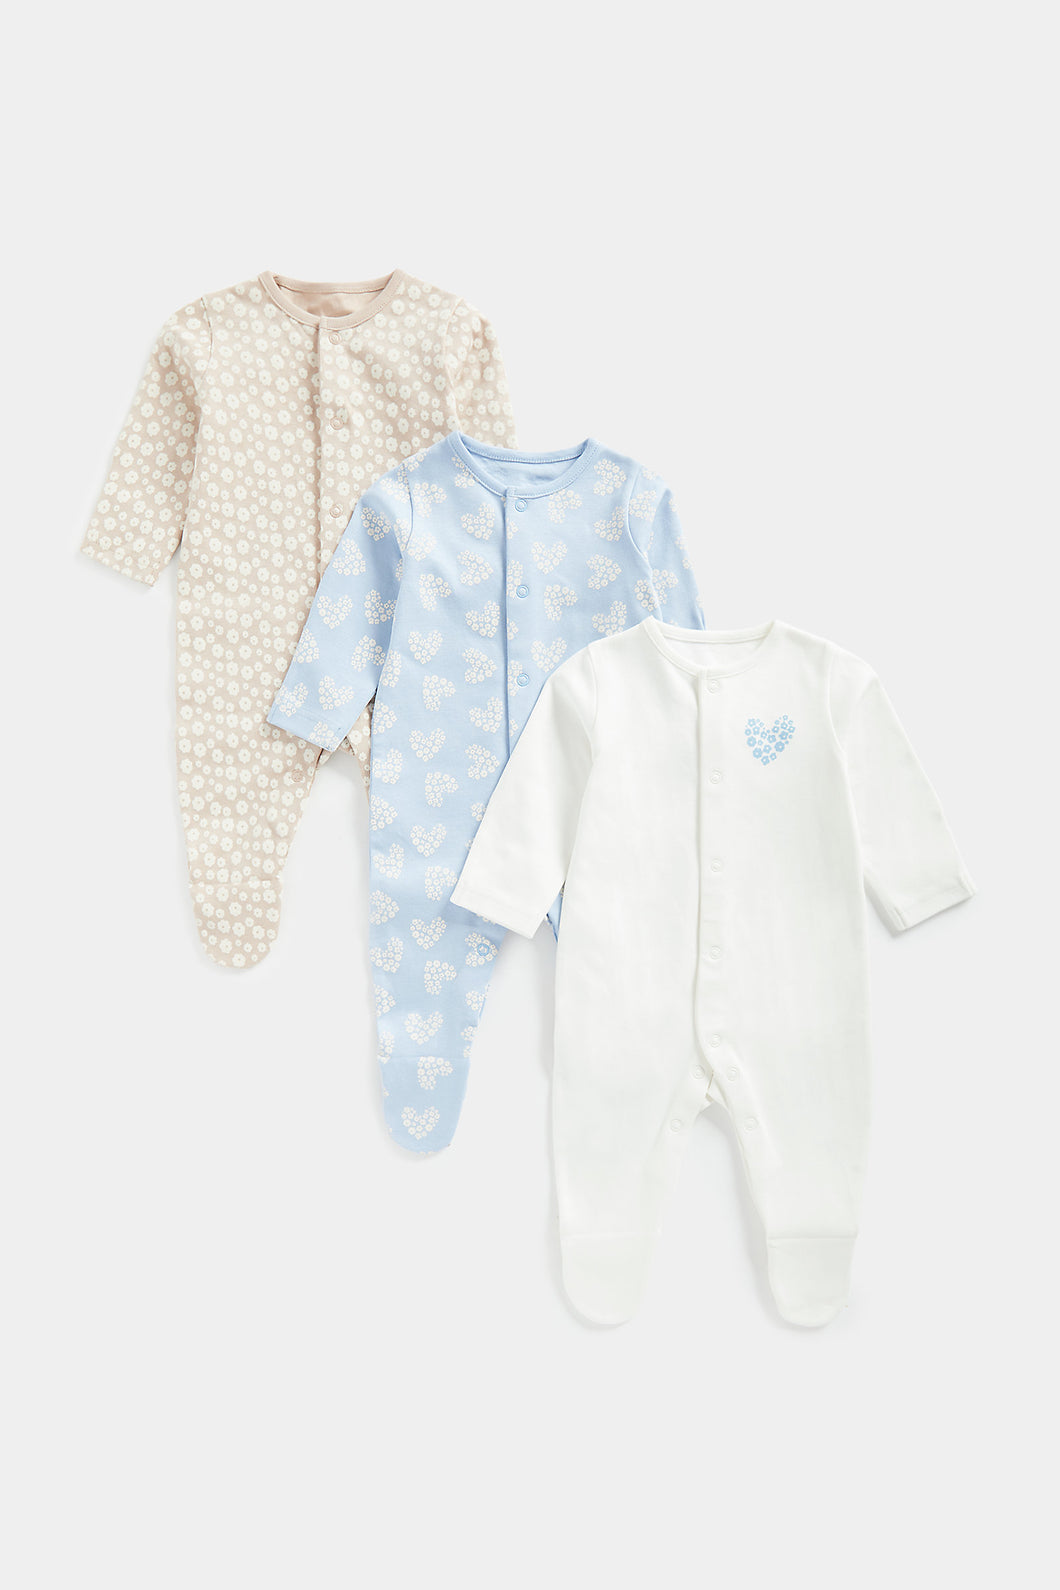 Mothercare Floral Heart Baby Sleepsuits - 3 Pack